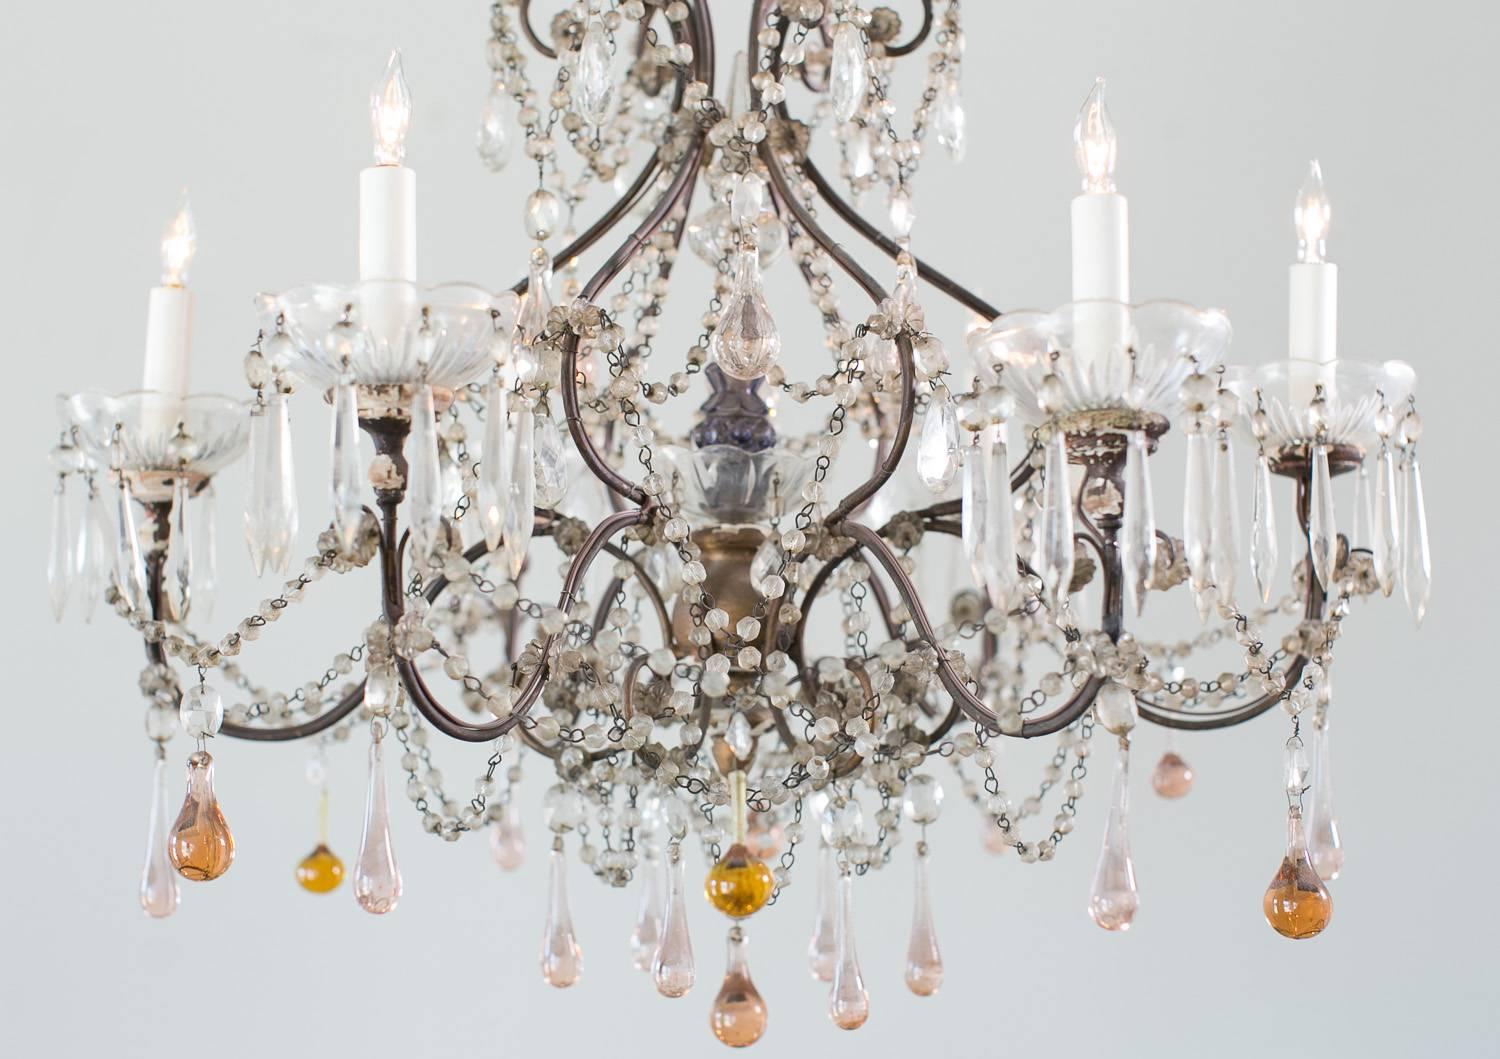 Delicate antique chandelier with a plethora of small crystal beads interconnecting the six arms. Light, peach colored teardrop crystal balls decorate the underside of this fabulous light. The center features a lovely mix of beads and faceted